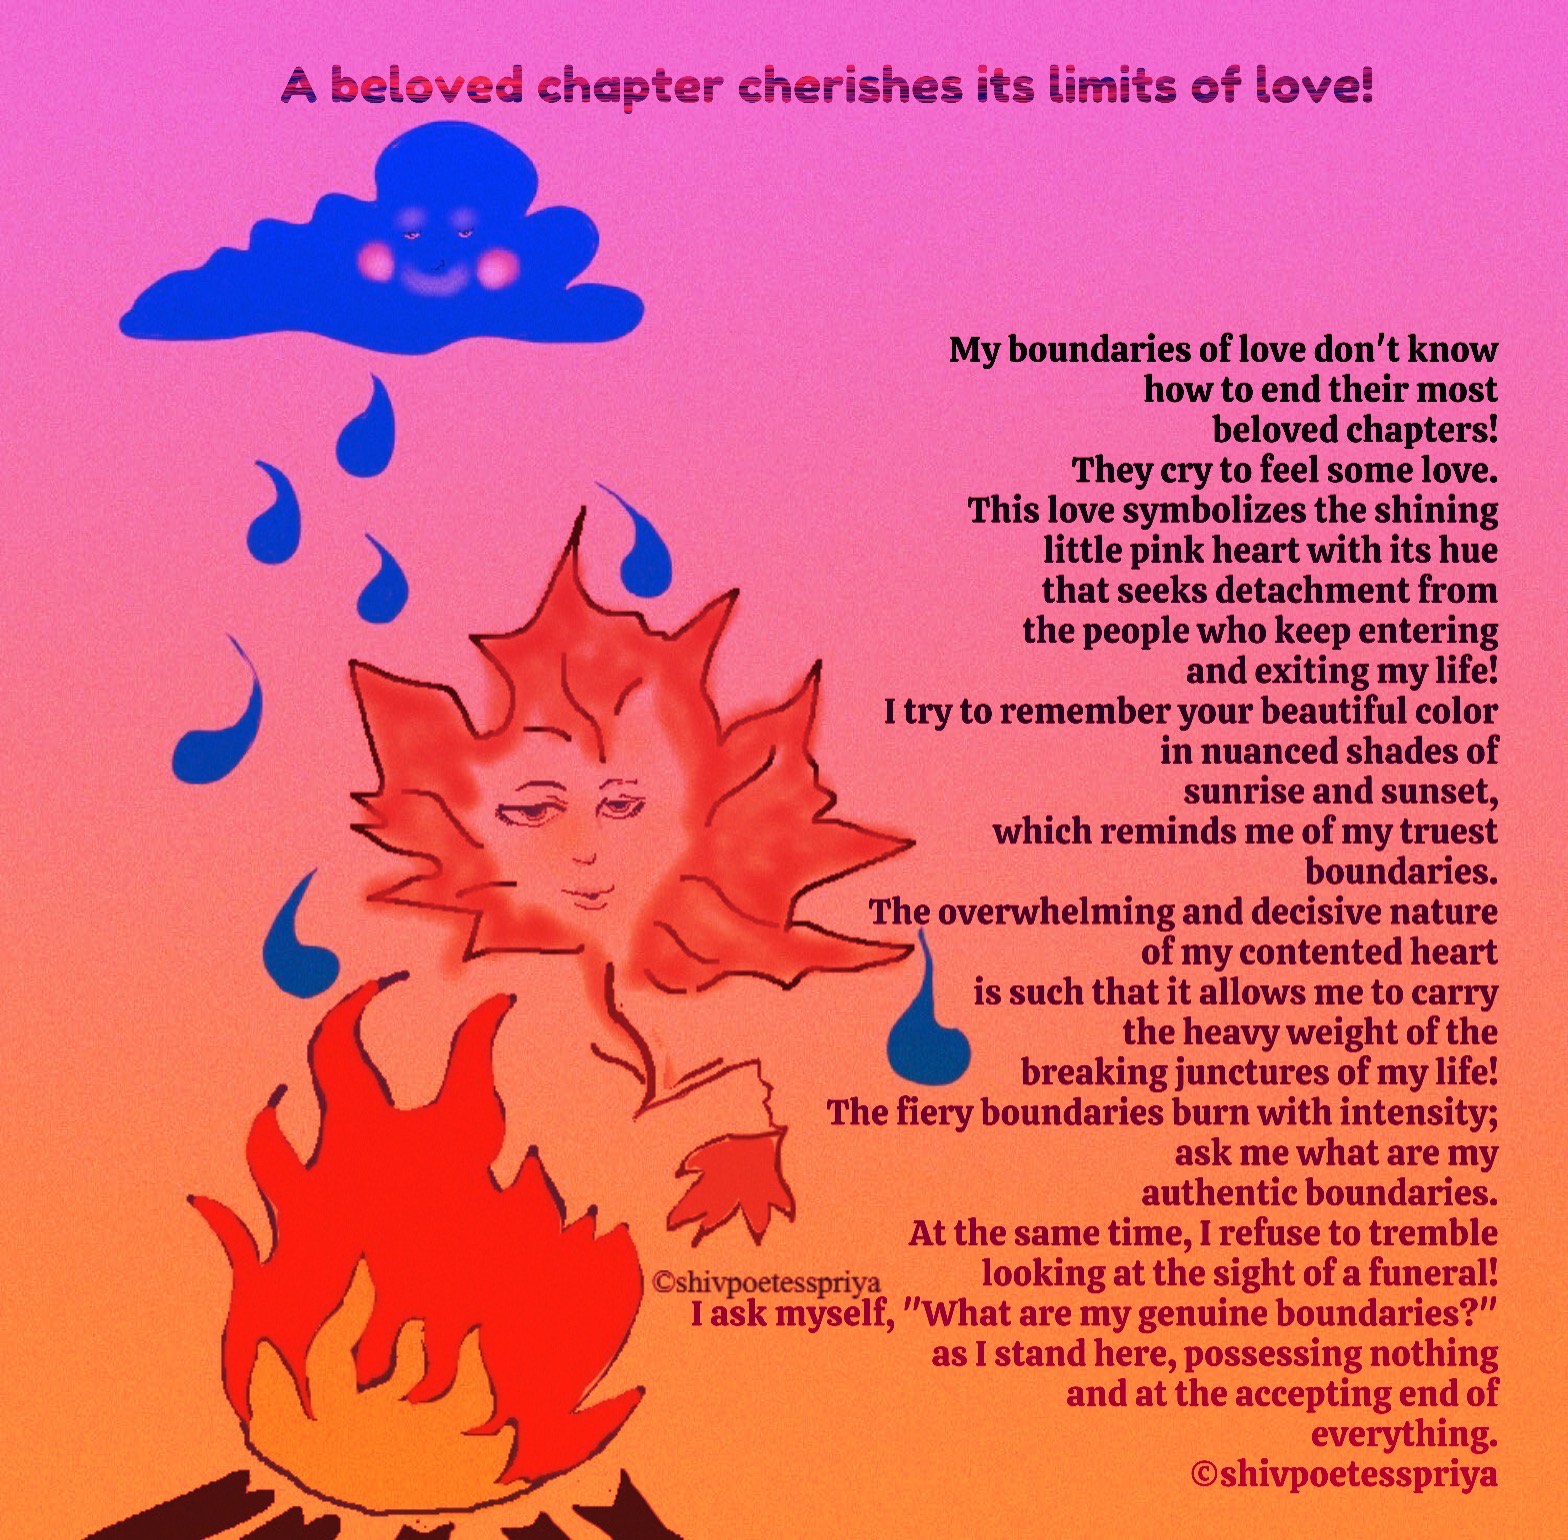 A Beloved Chapter Cherishes Its Limits Of Love!